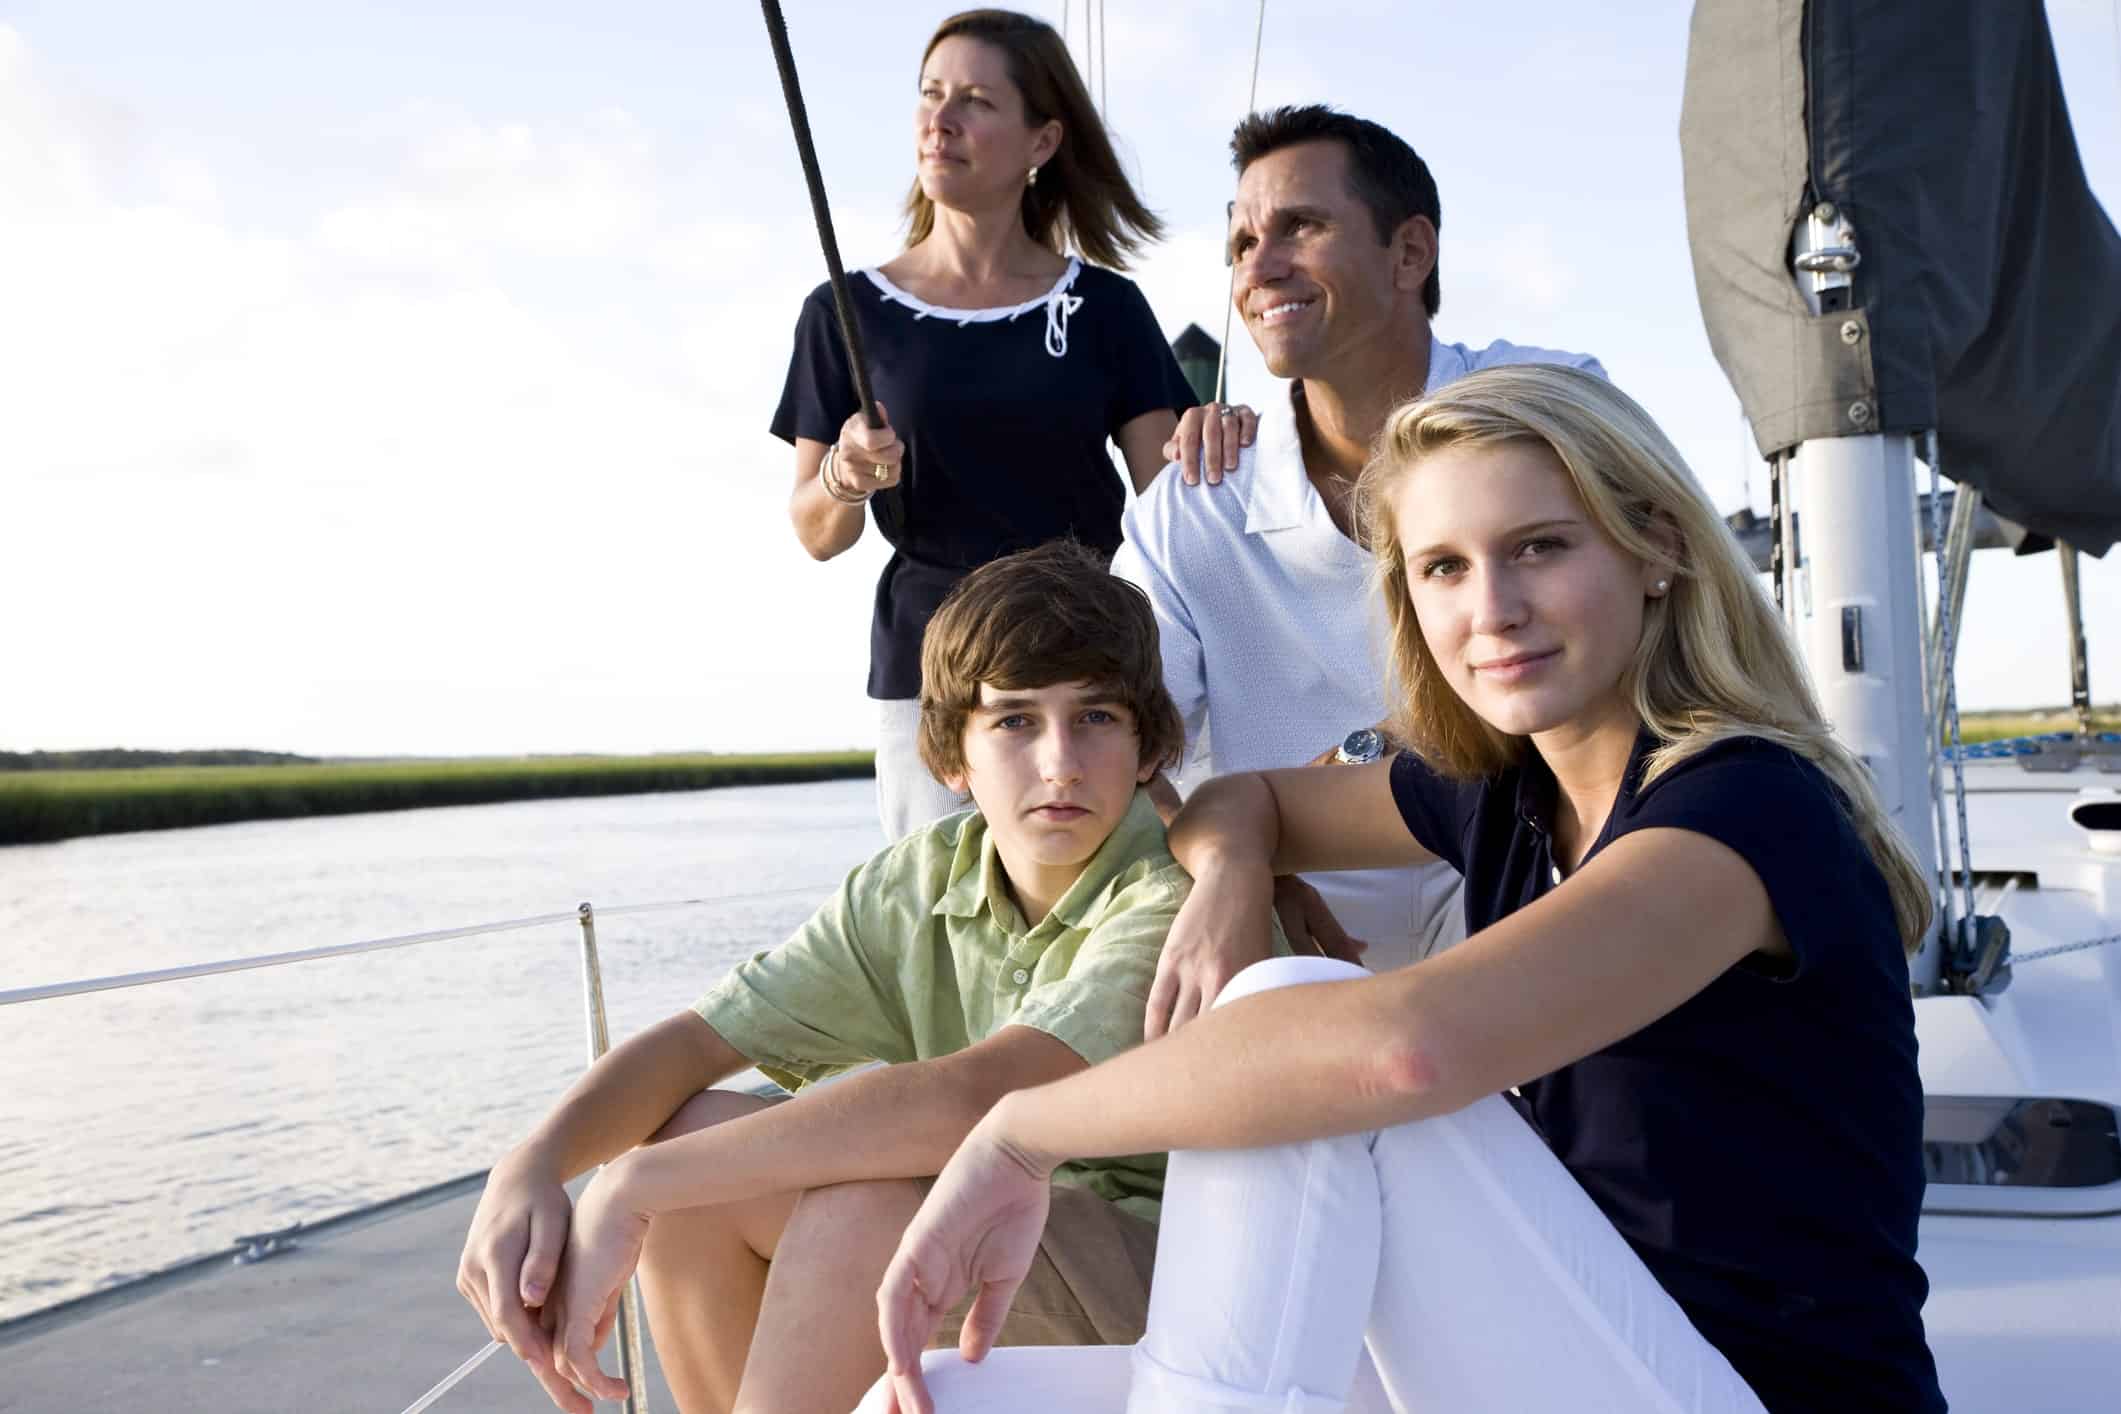 Boat Buyers Are Getting Younger, According To Recent Trends